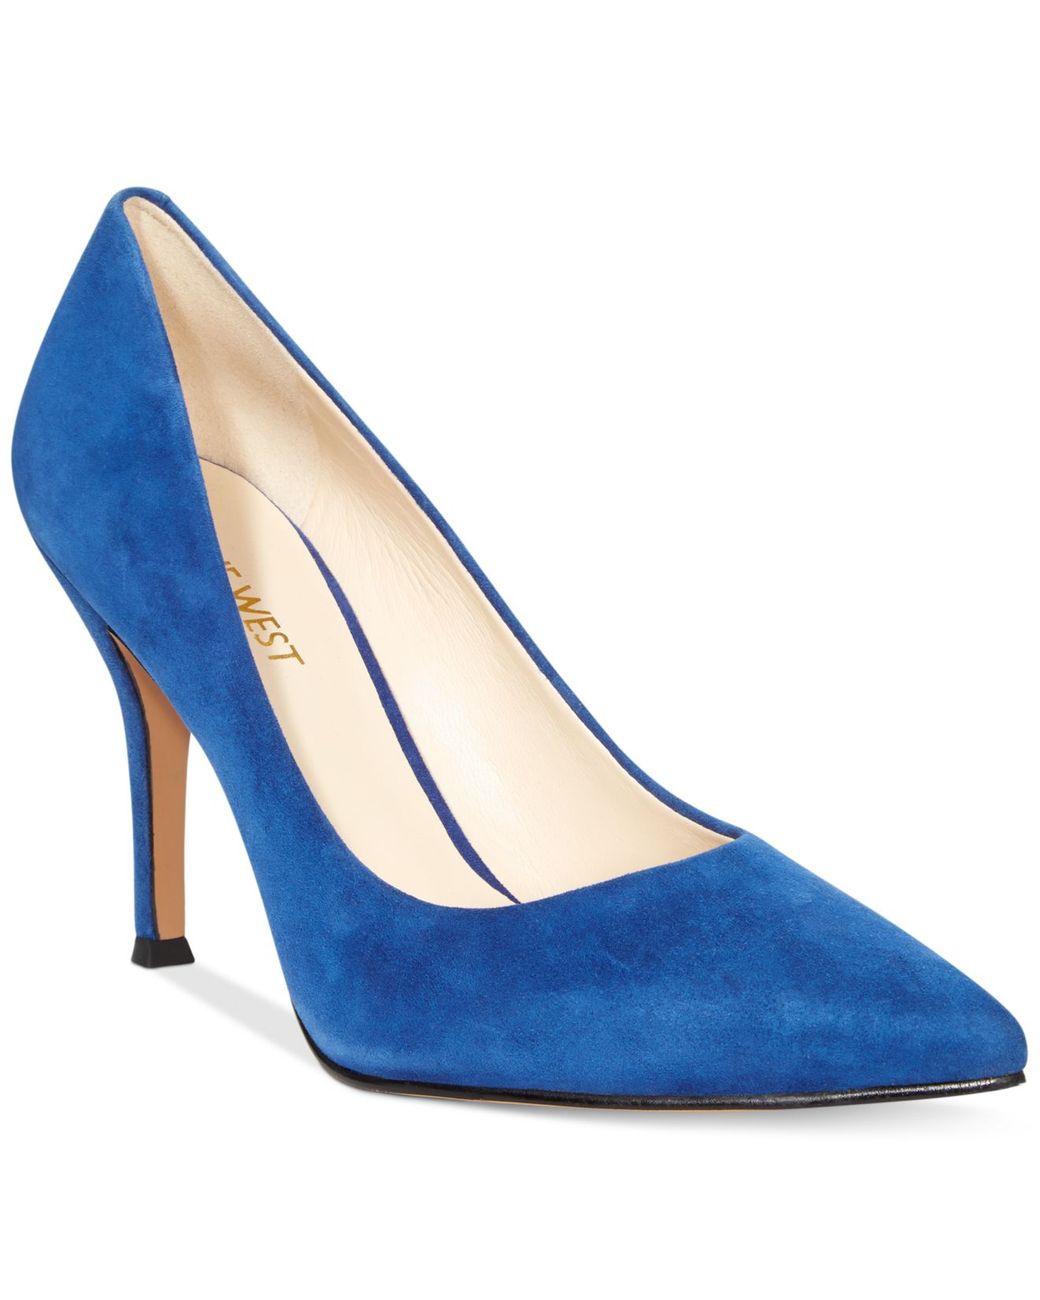 Nine West Flax Suede Pointed Toe Pumps in Blue | Lyst